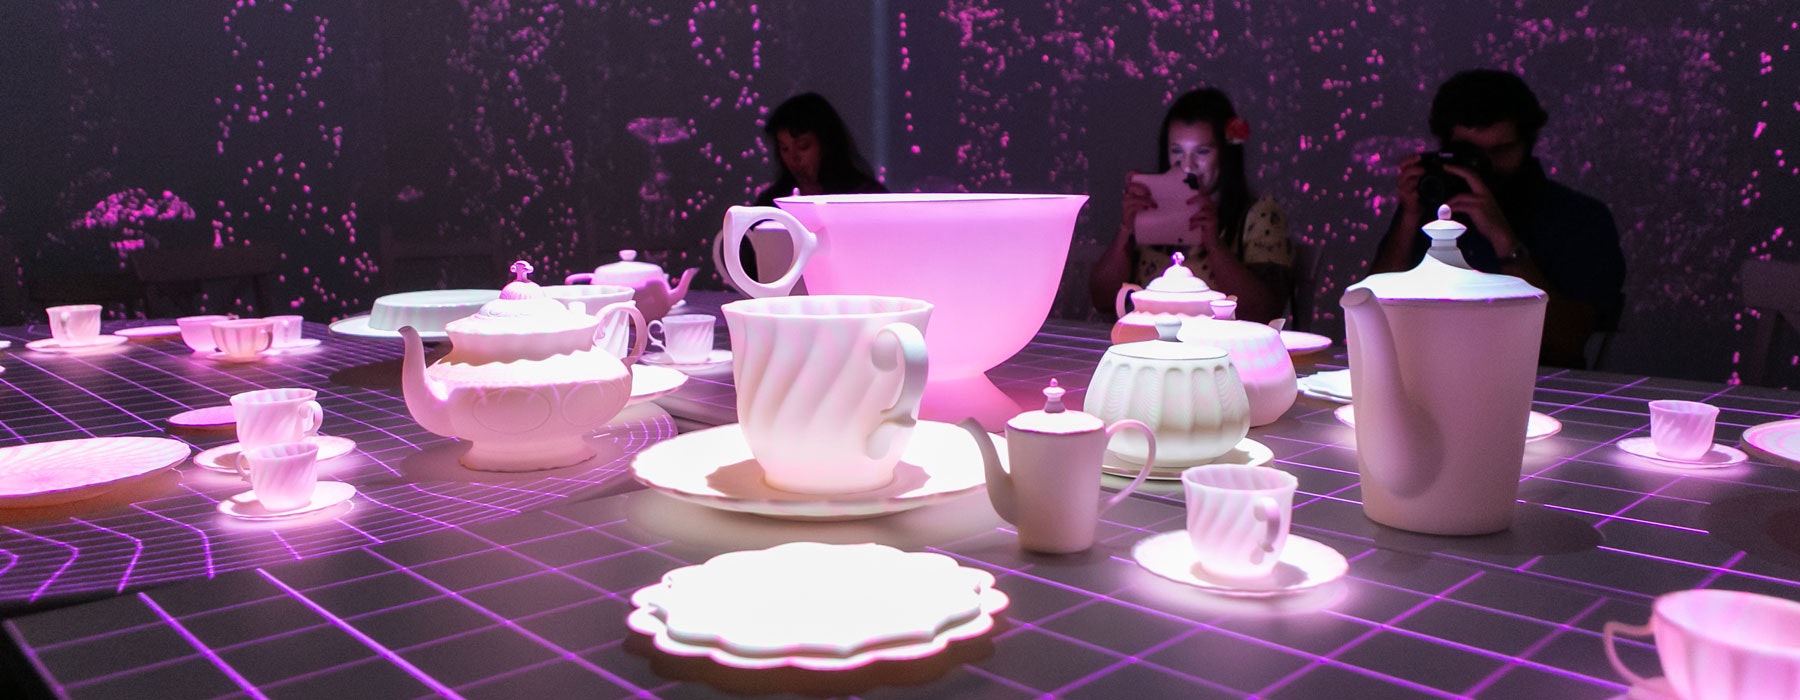 Two people sit at a table with a tea set on it. In the background are projected images of mushrooms and trees